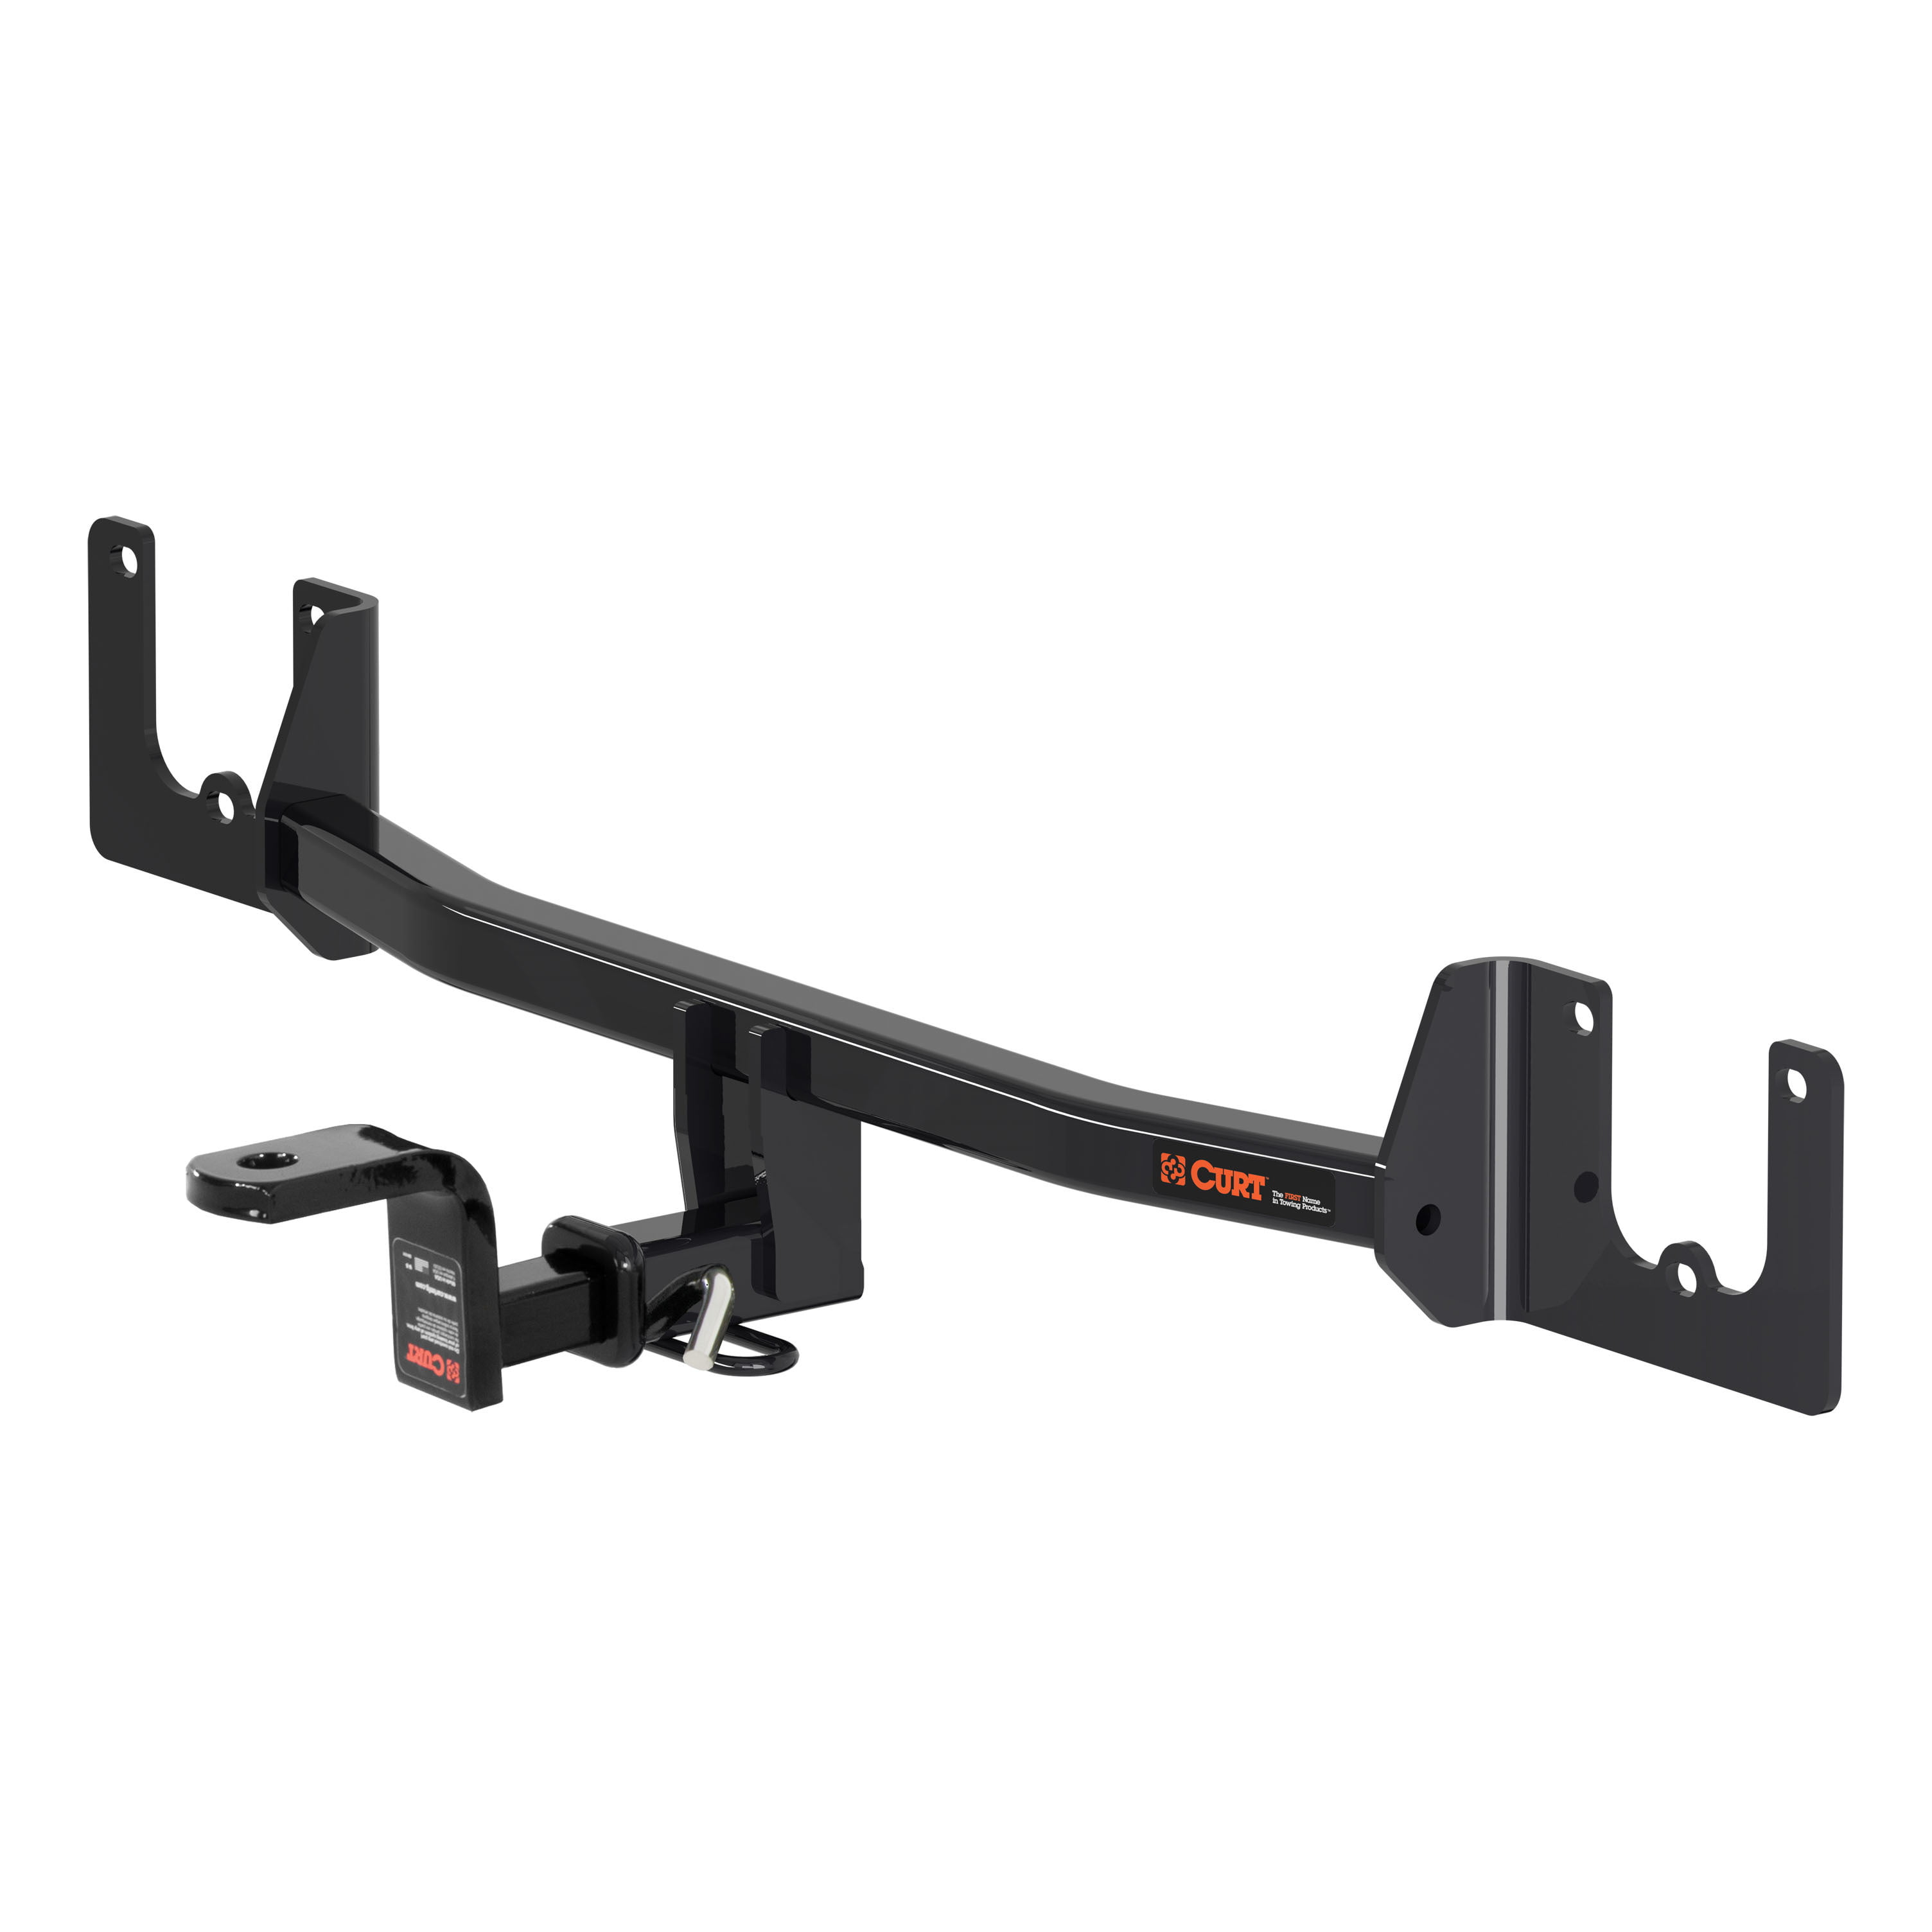 CURT 114843 Class 1 Trailer Hitch with Ball Mount, 1-1/4-Inch Receiver Toyota Prius C Trailer Hitch